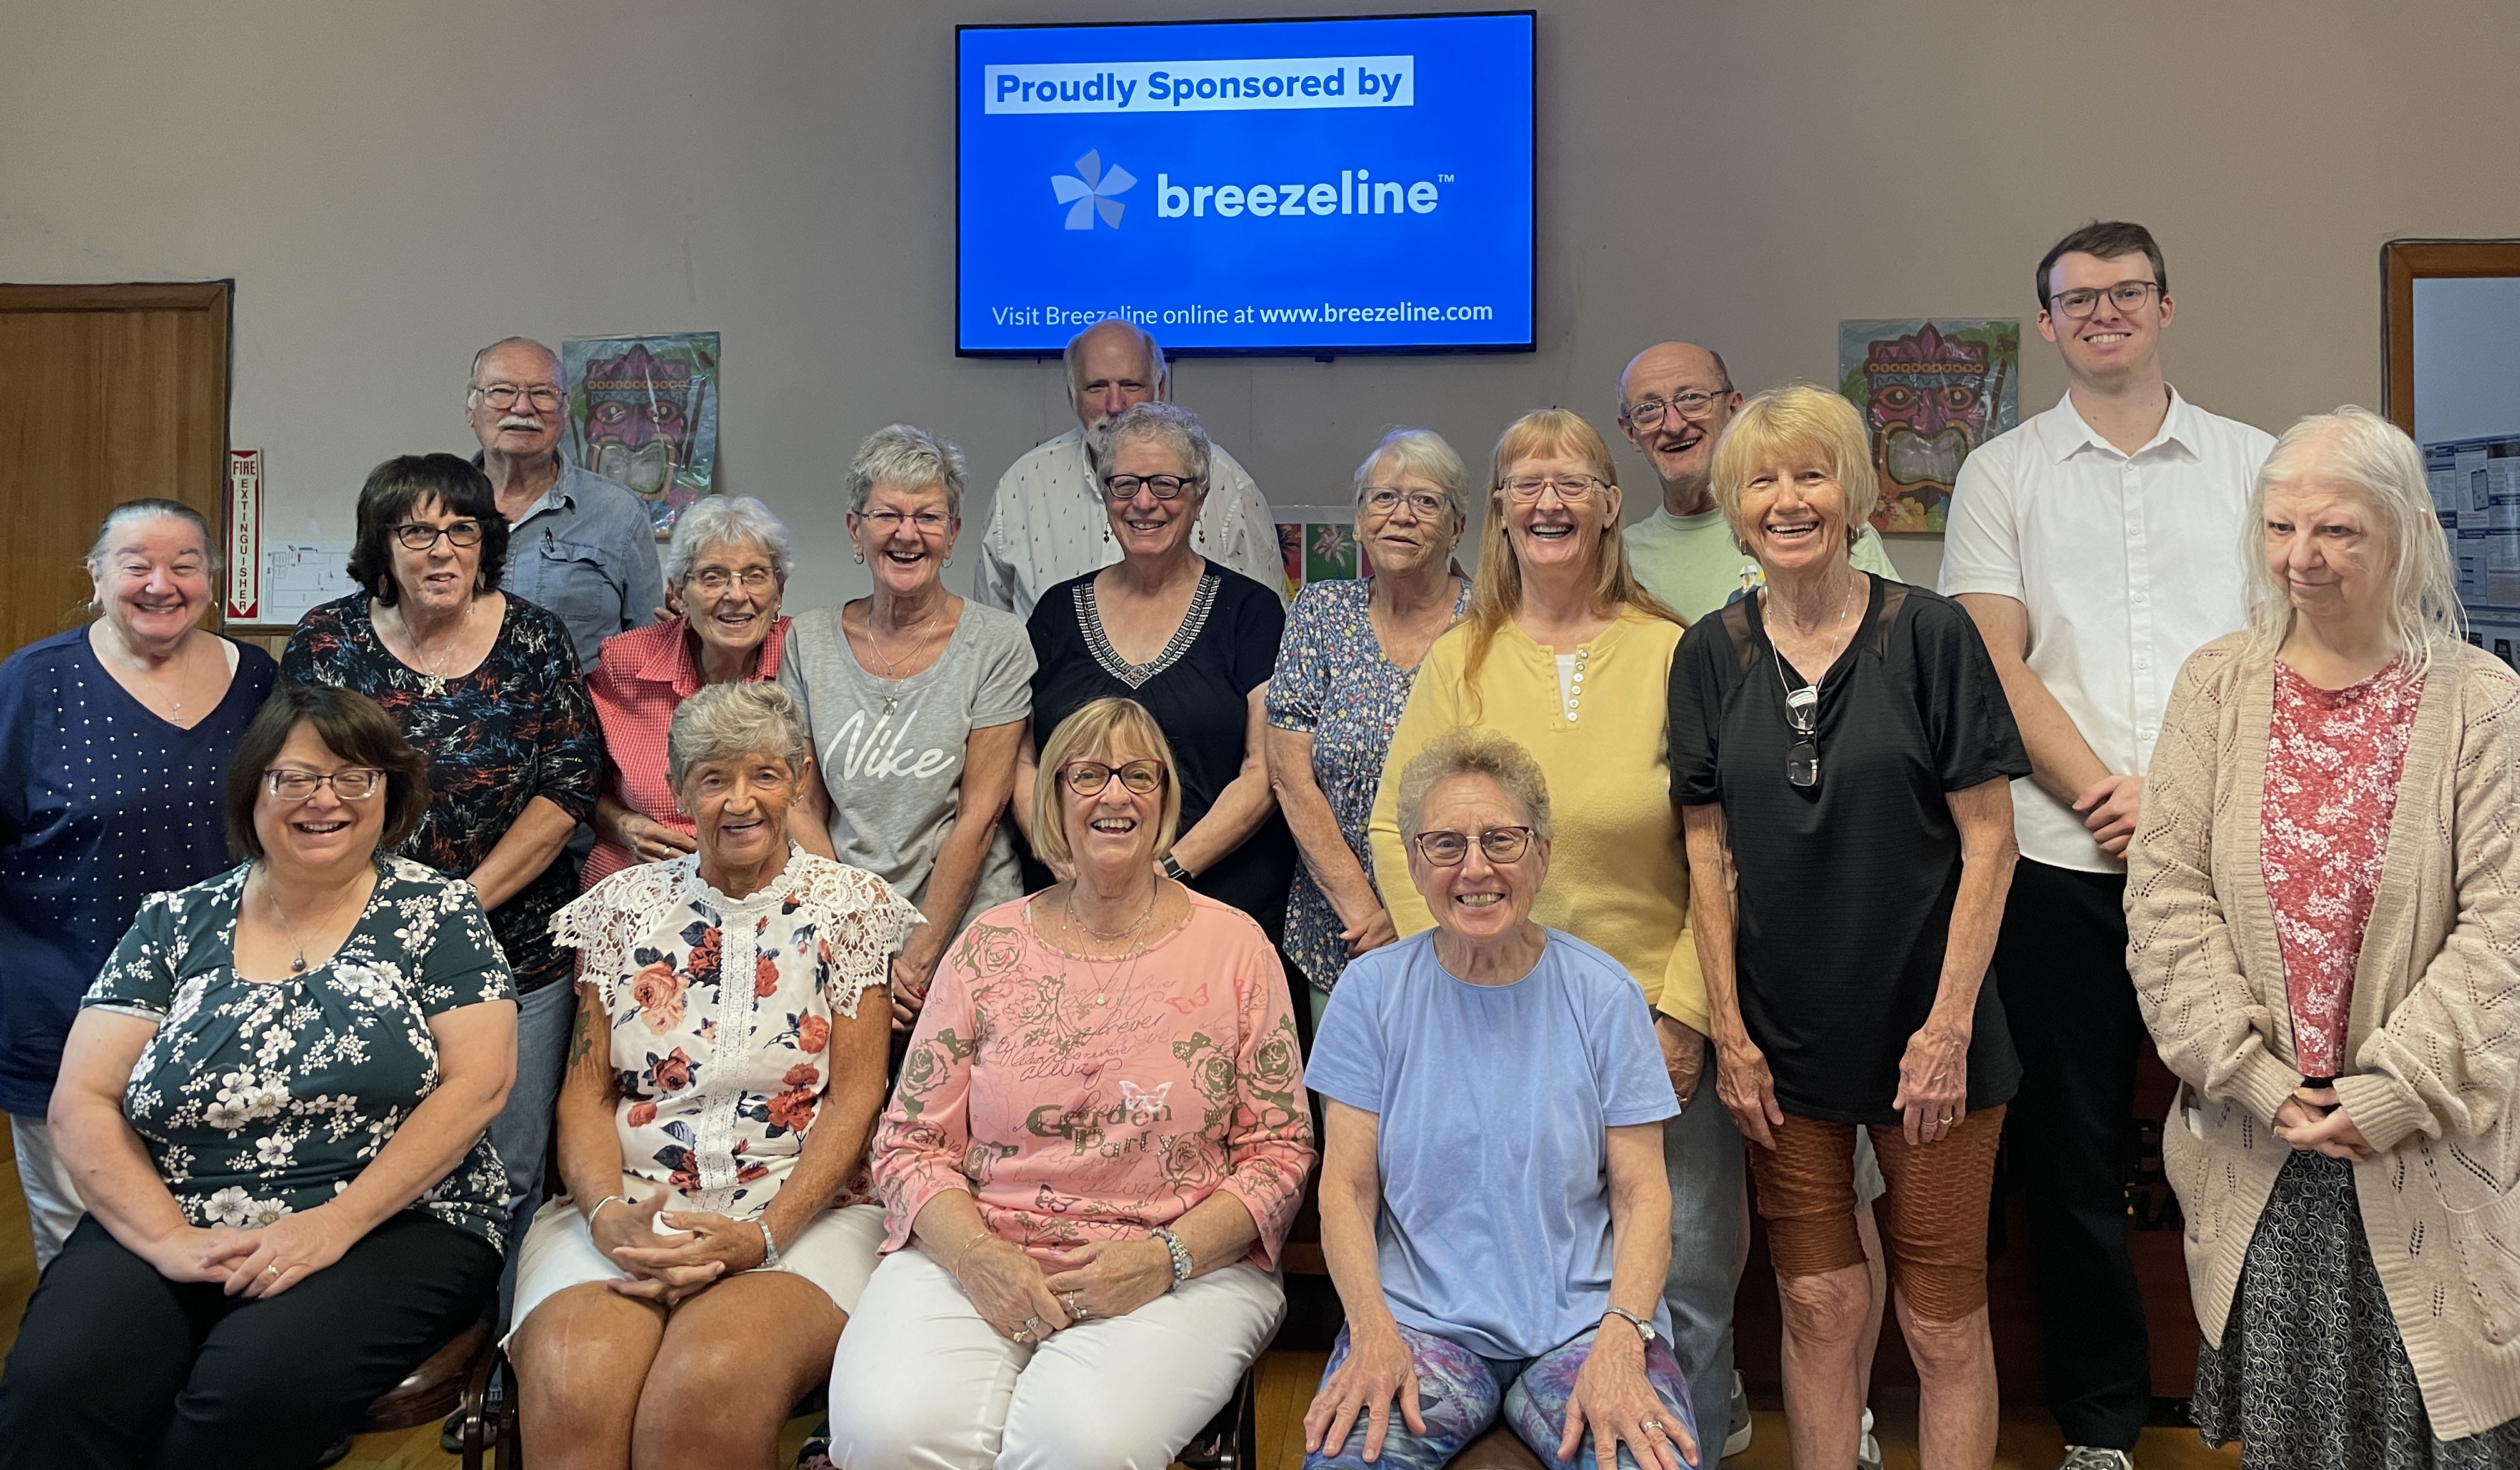 Breezeline hosted a digital learning seminar on August 5 at the Berwick Senior Center to introduce older adults to the benefits of telehealth services